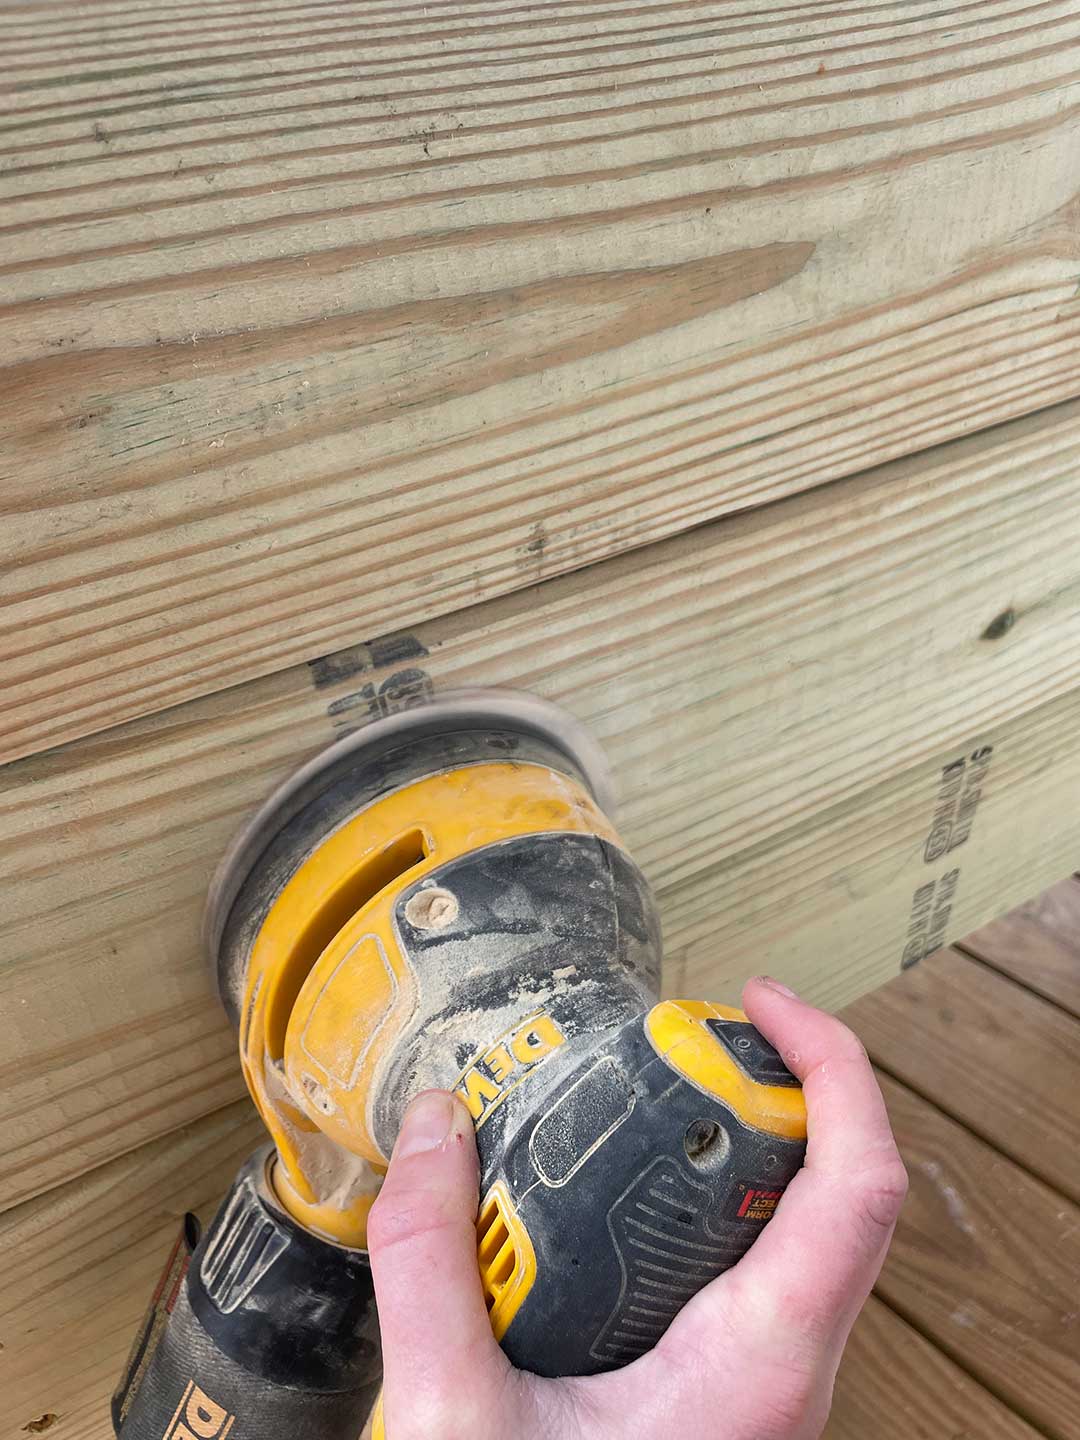 A person using a sander over wood.